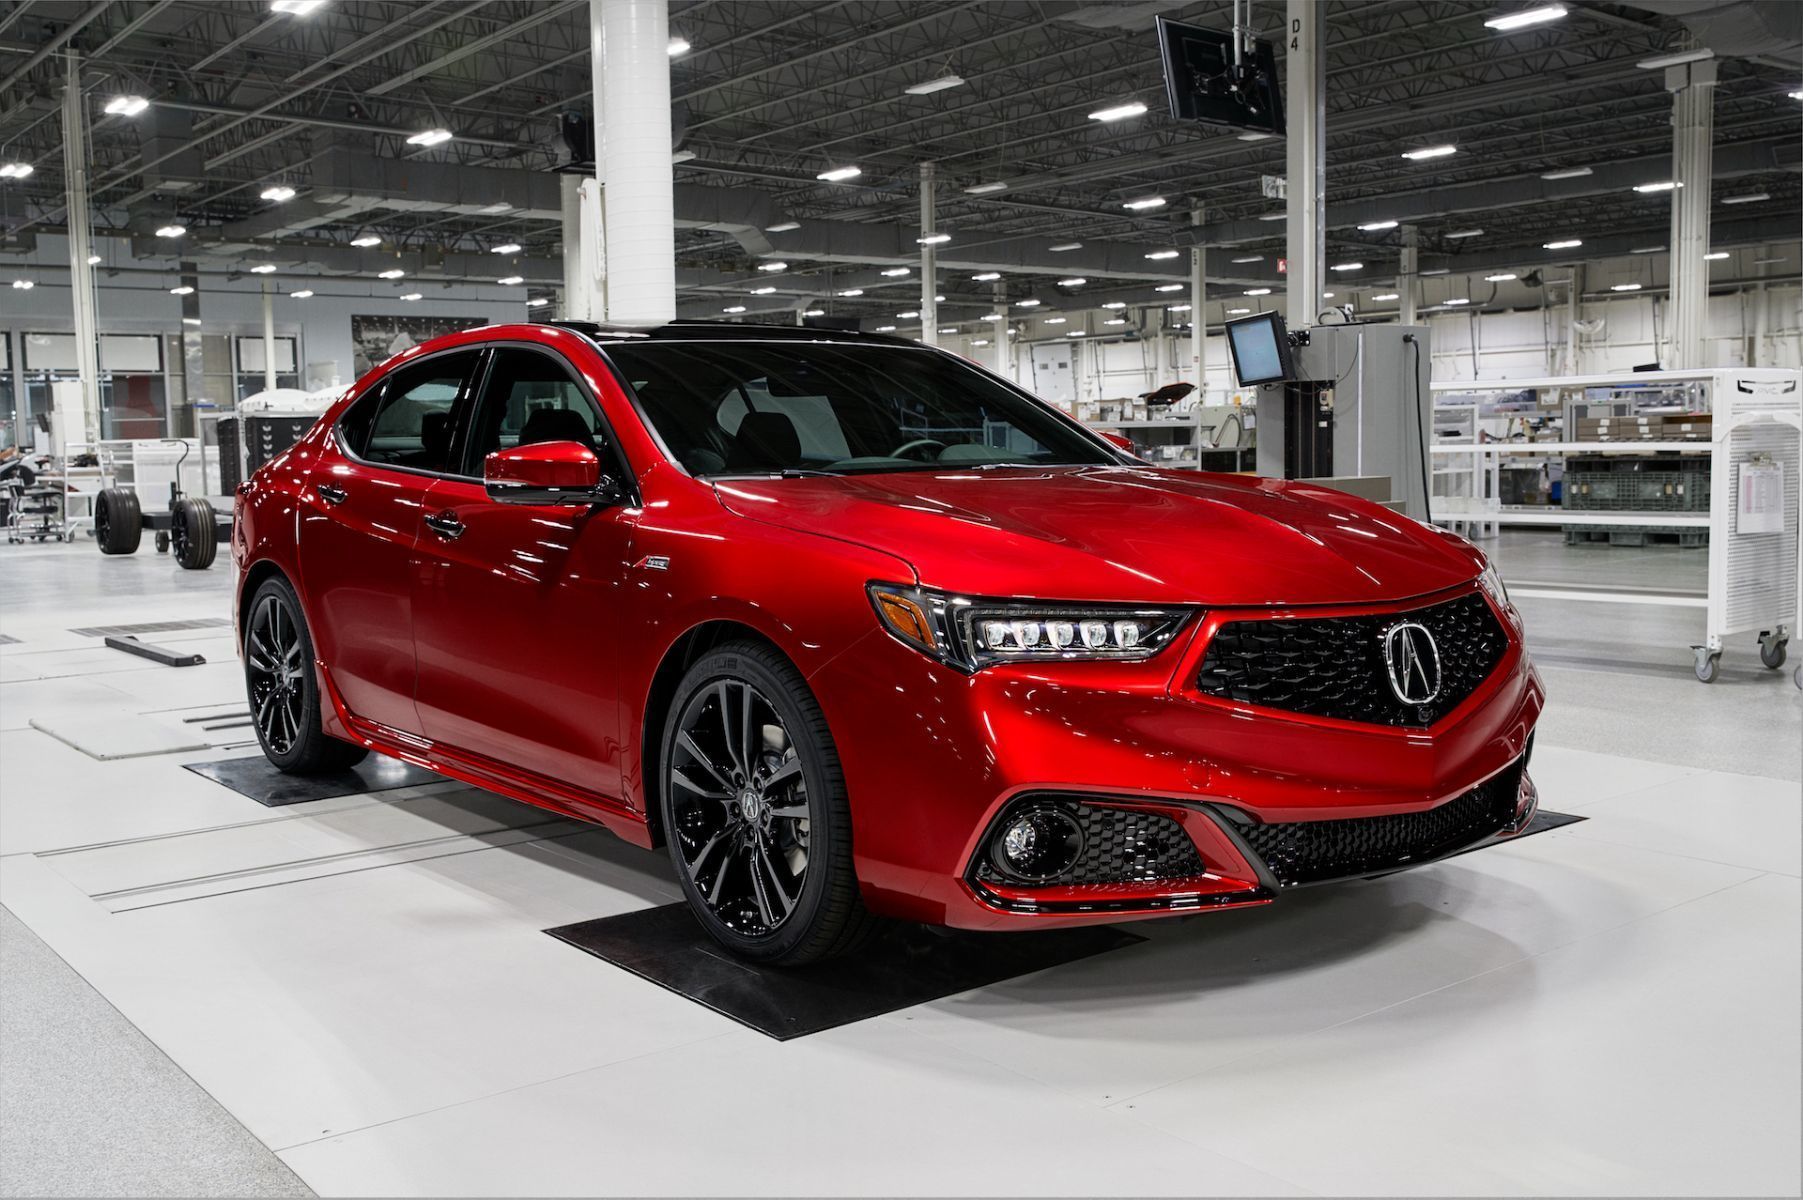 2020 Acura TLX Puts the Thrill Back in Daily Drives